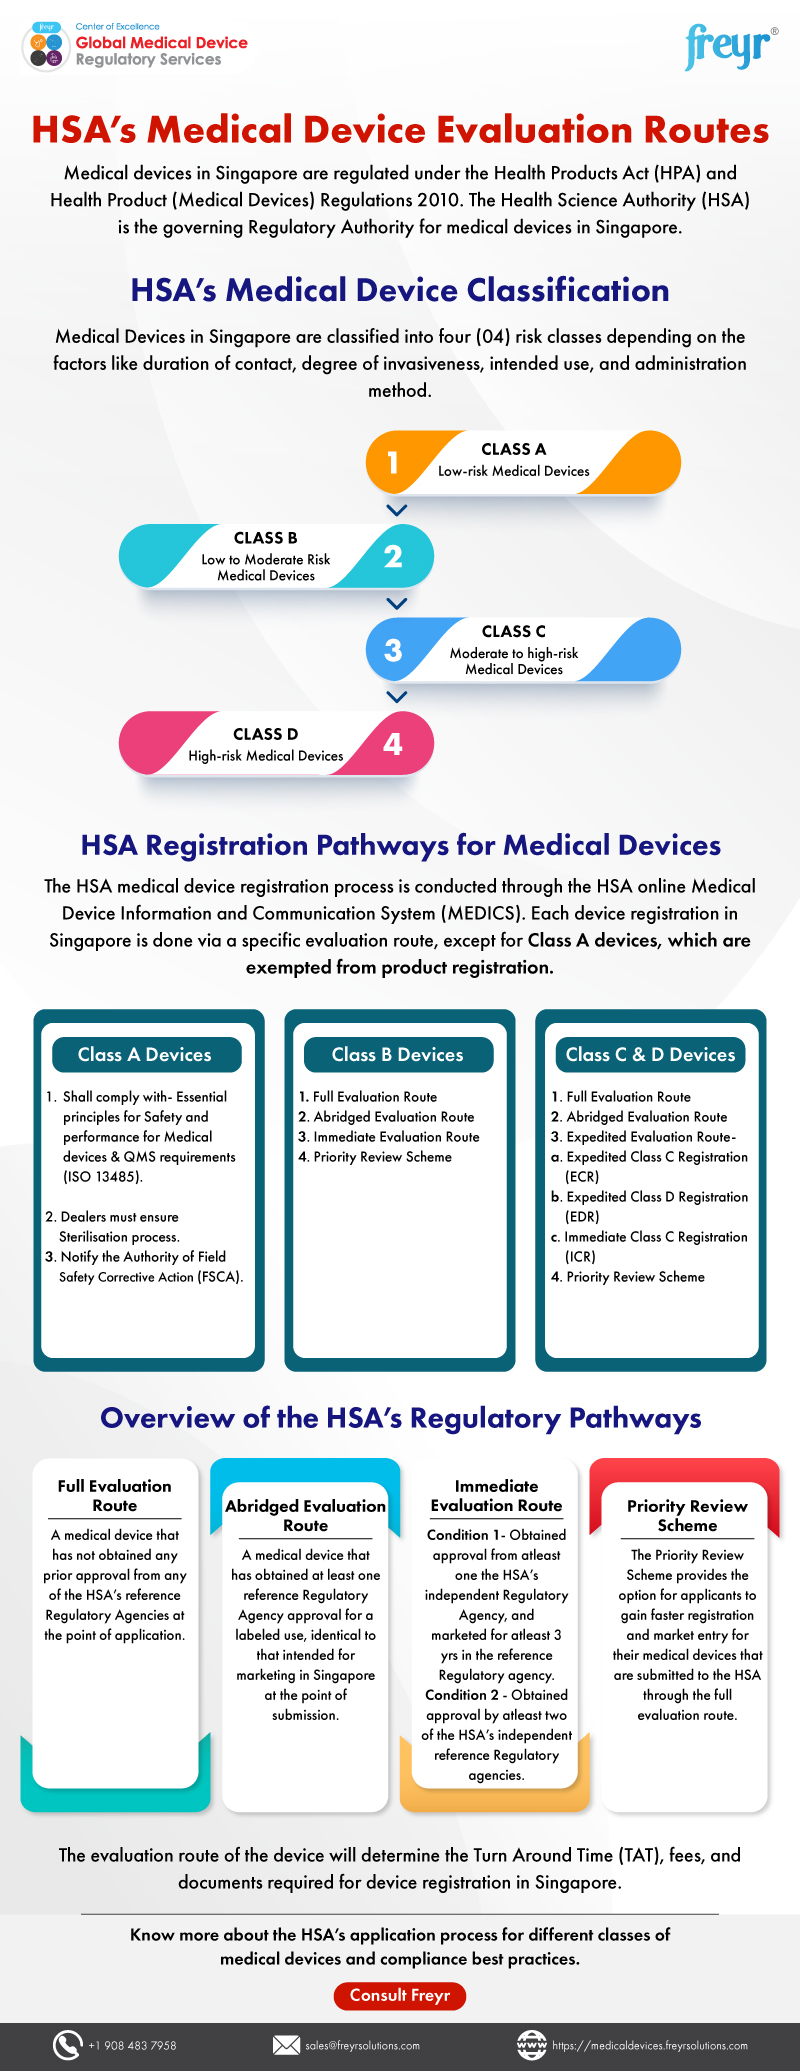 HSA’s Medical Device Evaluation Routes